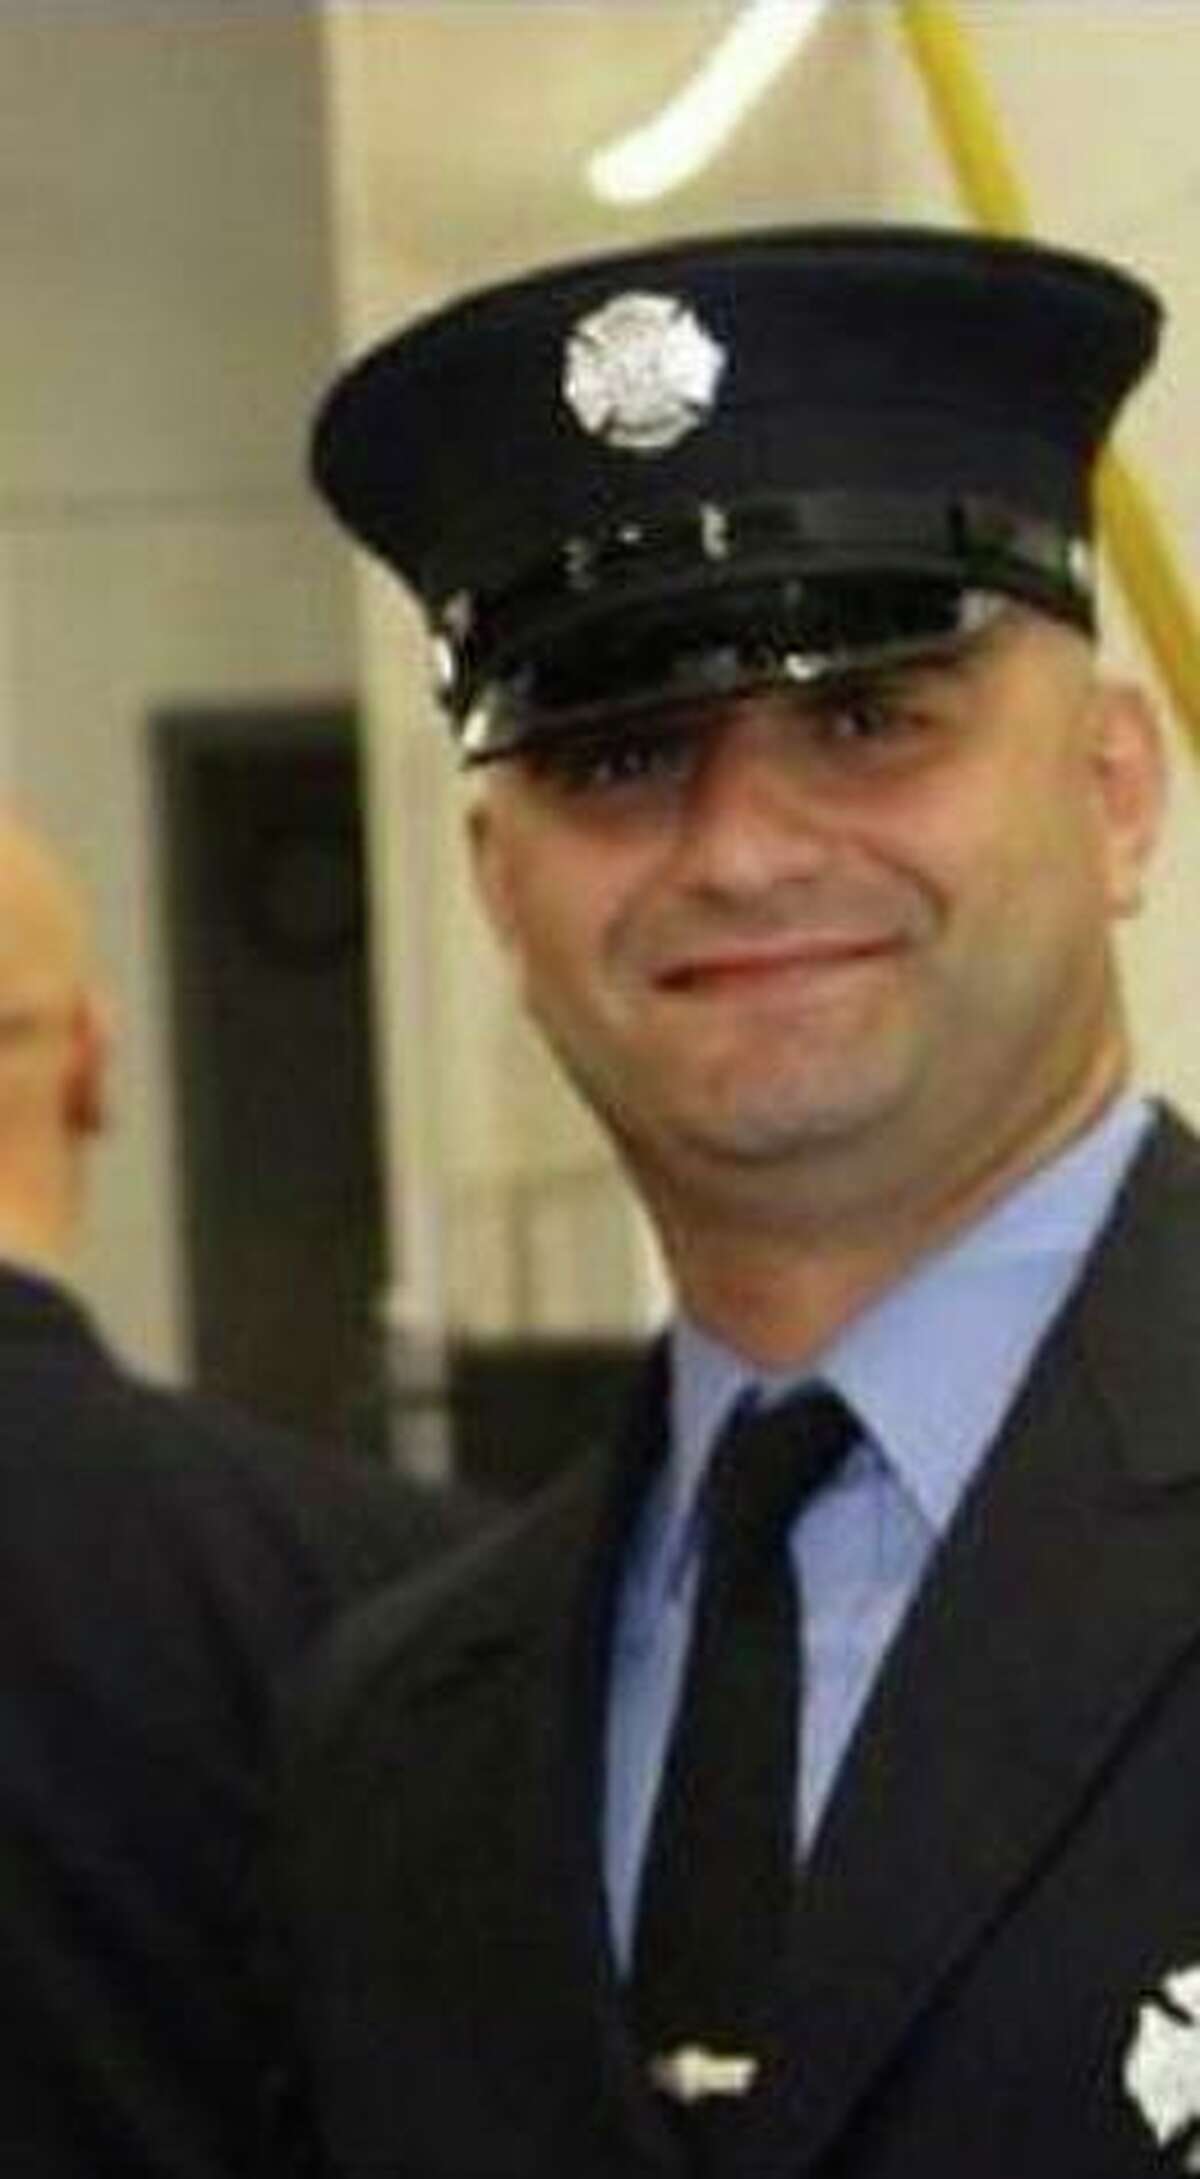 Former NYPD detective loses 100 pounds after cancer, heart failure diagnosis